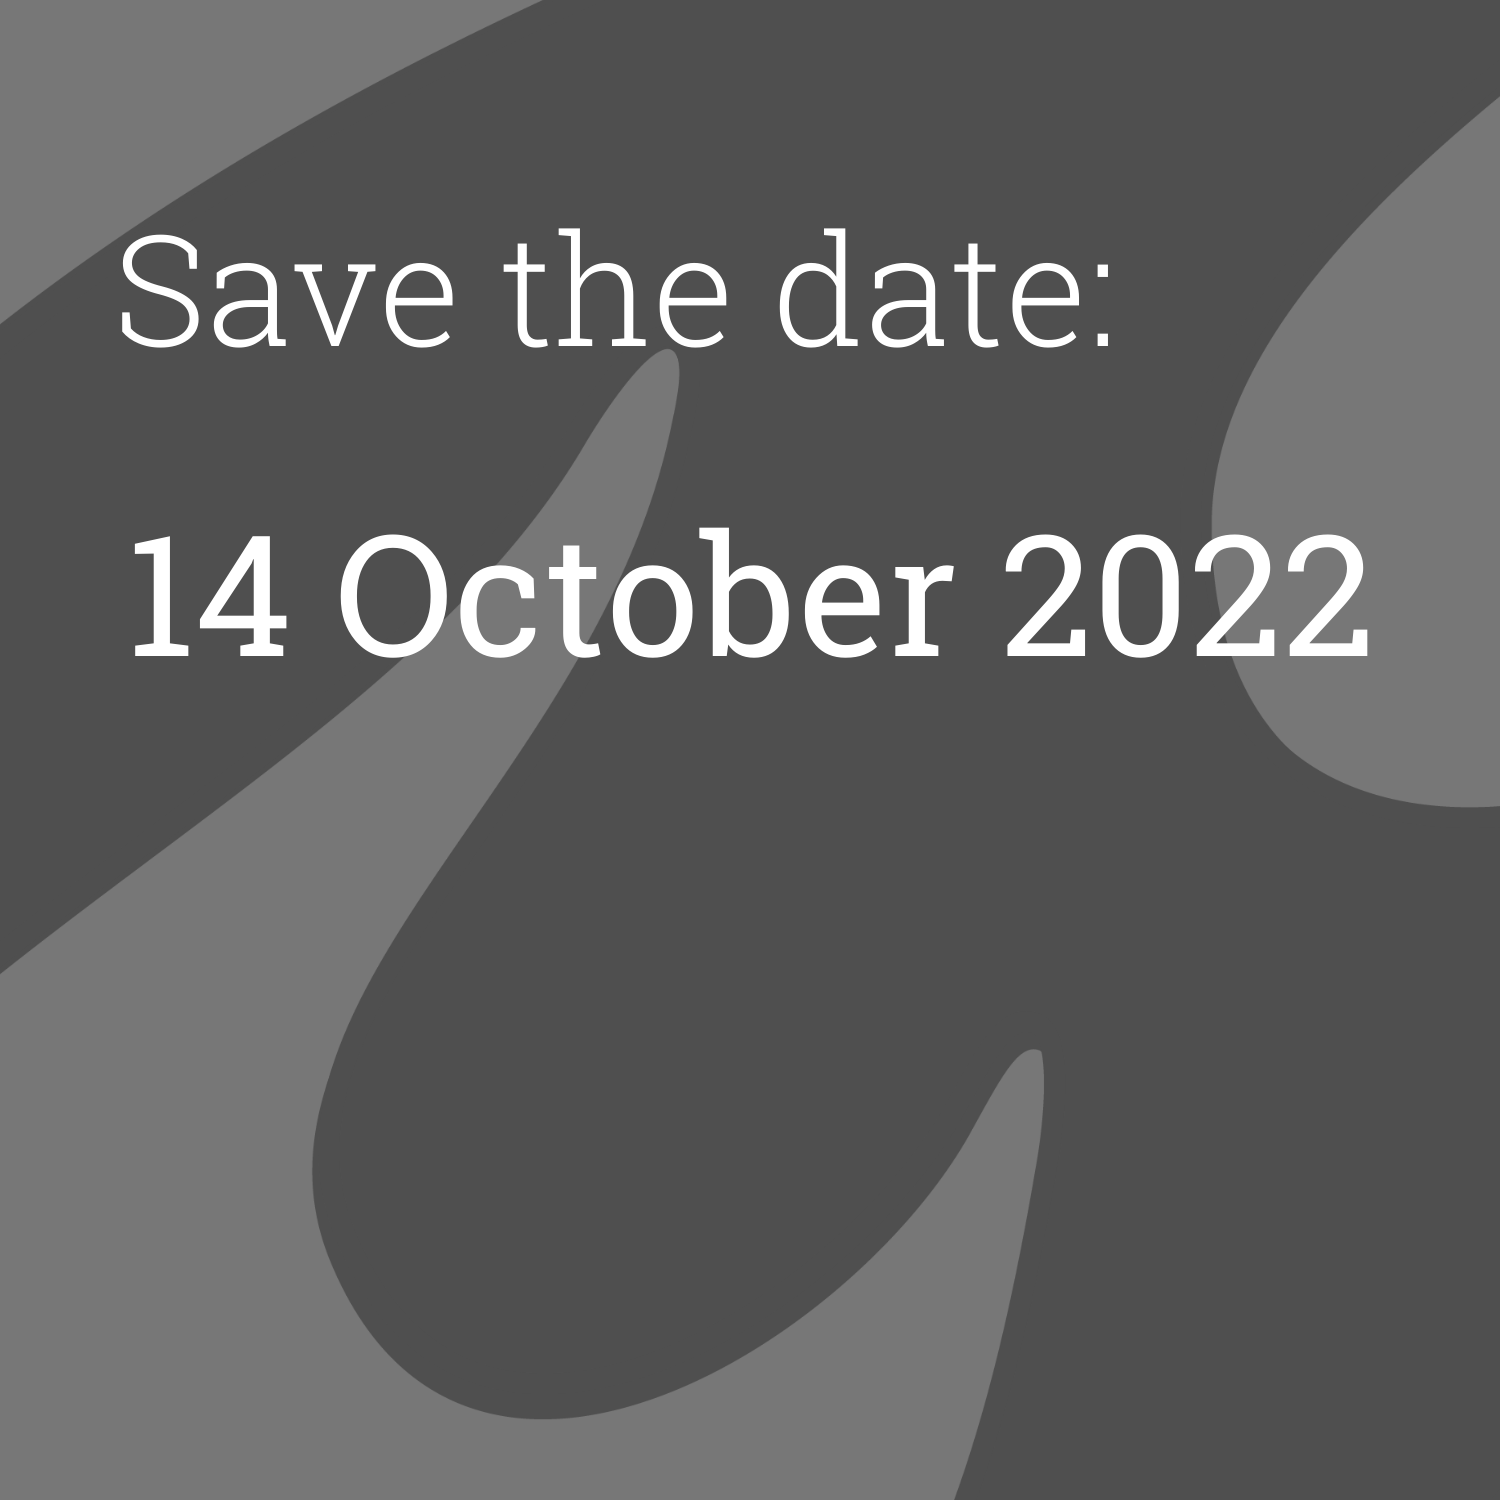 Save the date, 14 October 2022